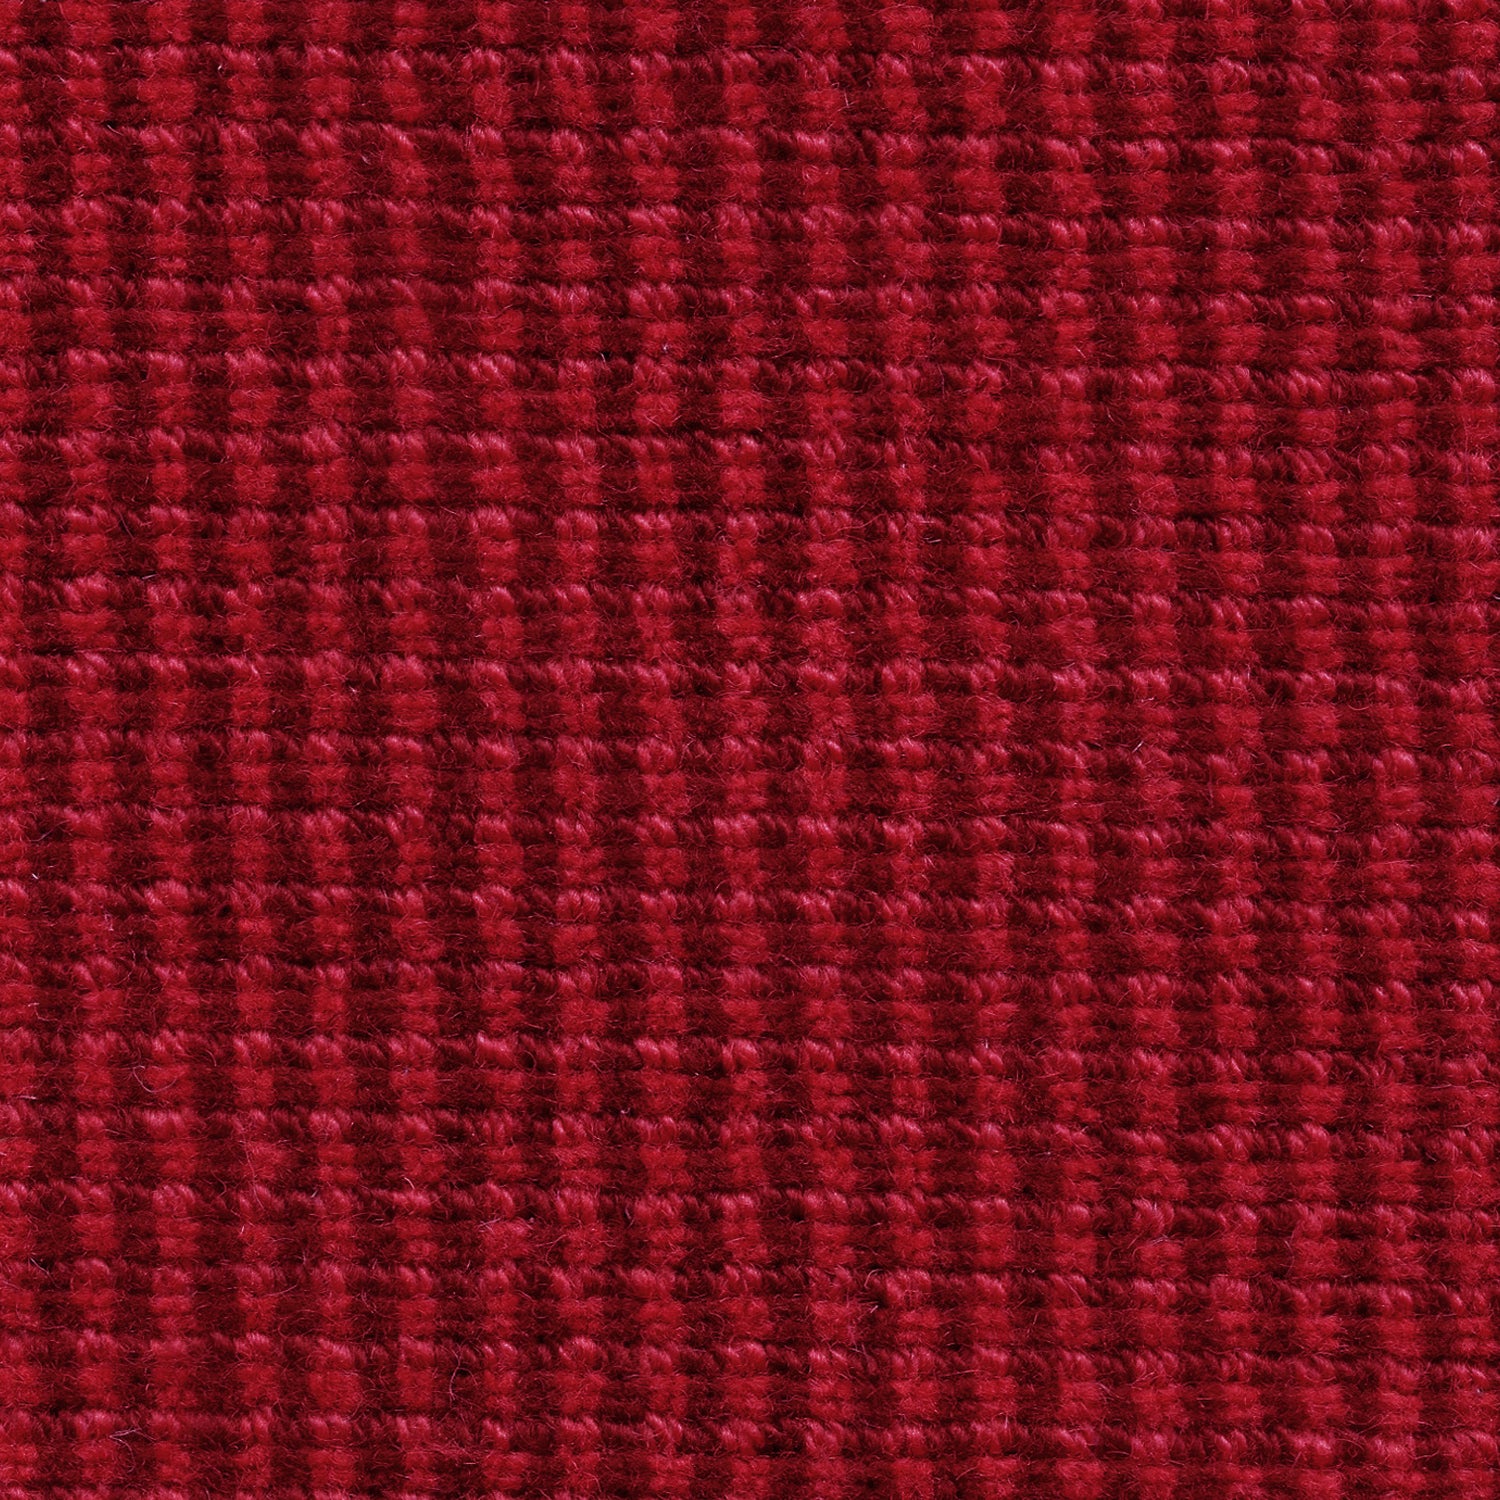 Wool broadloom carpet swatch in a high-pile striped weave in red and burgundy.